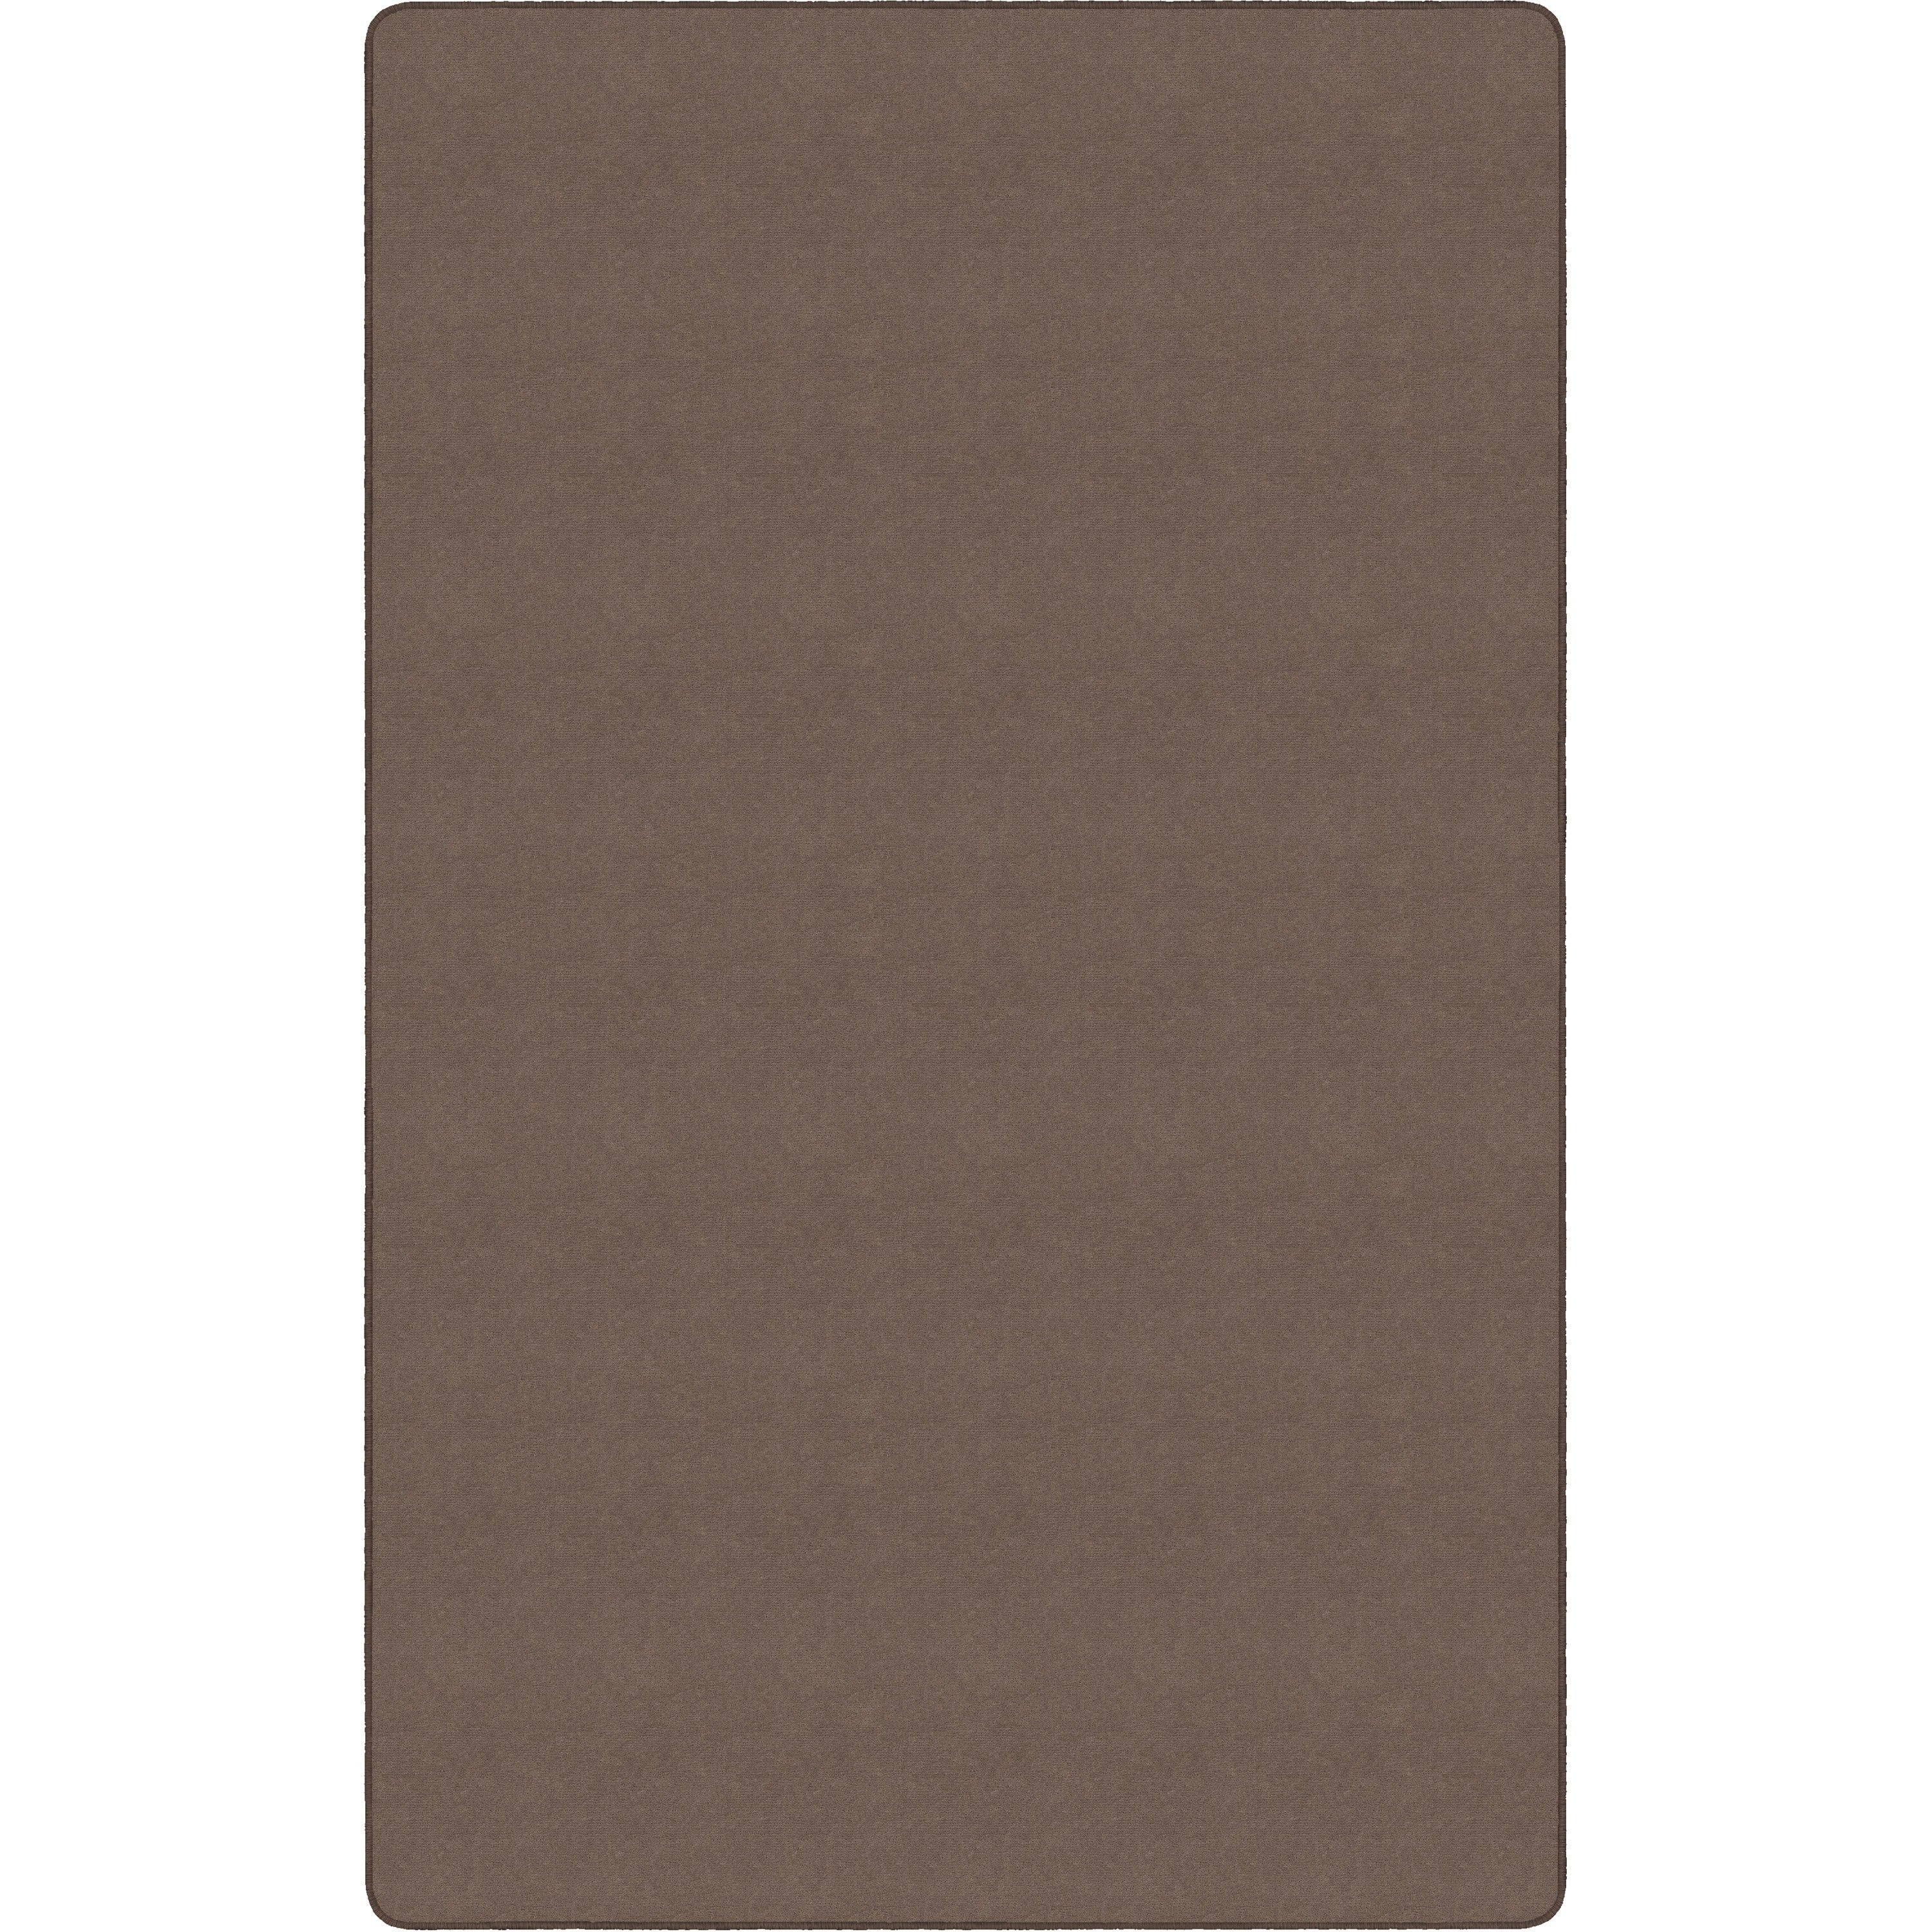 Flagship Carpets Americolors Solid Color Rug - Floor Rug - Traditional - 72" Length x 48" Width - Rectangle - Almond - Nylon